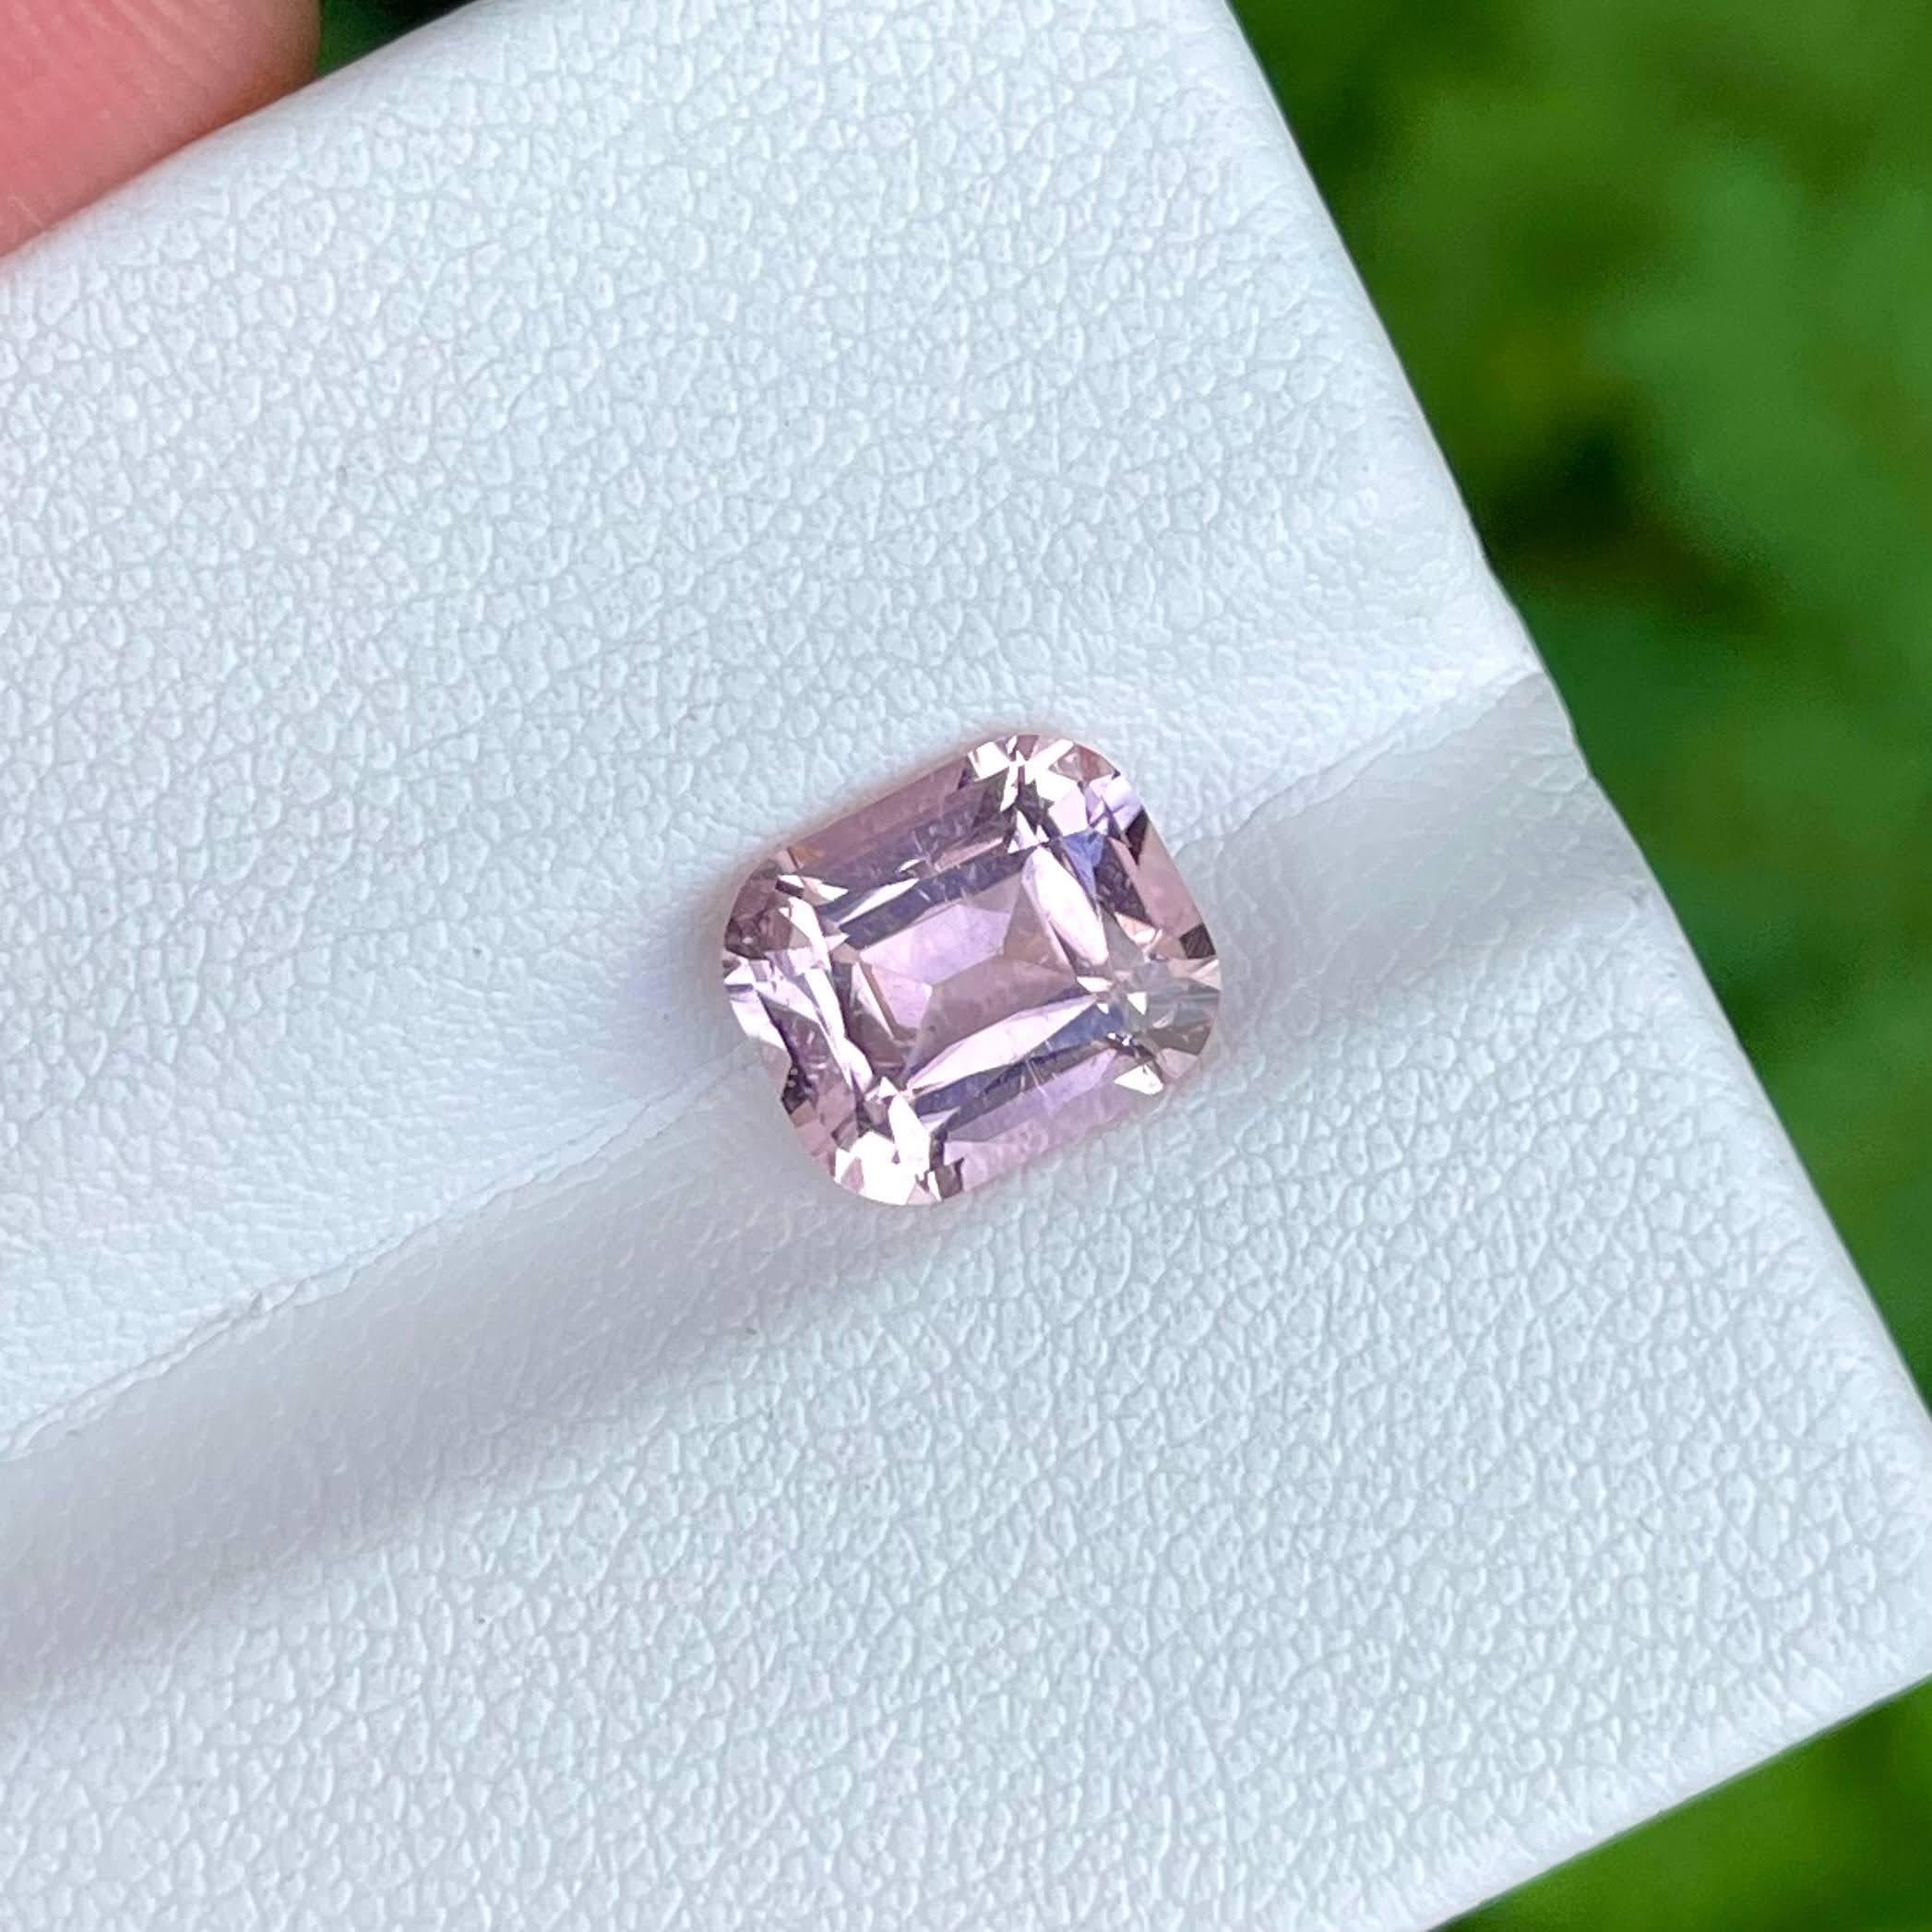 Gemstone Type Baby Pink Tourmaline
Weight 3.65 carats
Dimensions 8.8 x 7.5 x 5.4 mm
Clarity SI (Slightly Included)
Shape Cushion
Cut Step Cushion
Origin Nigeria
Treatment None




Behold the exquisite allure of this natural Baby Pink Tourmaline, a